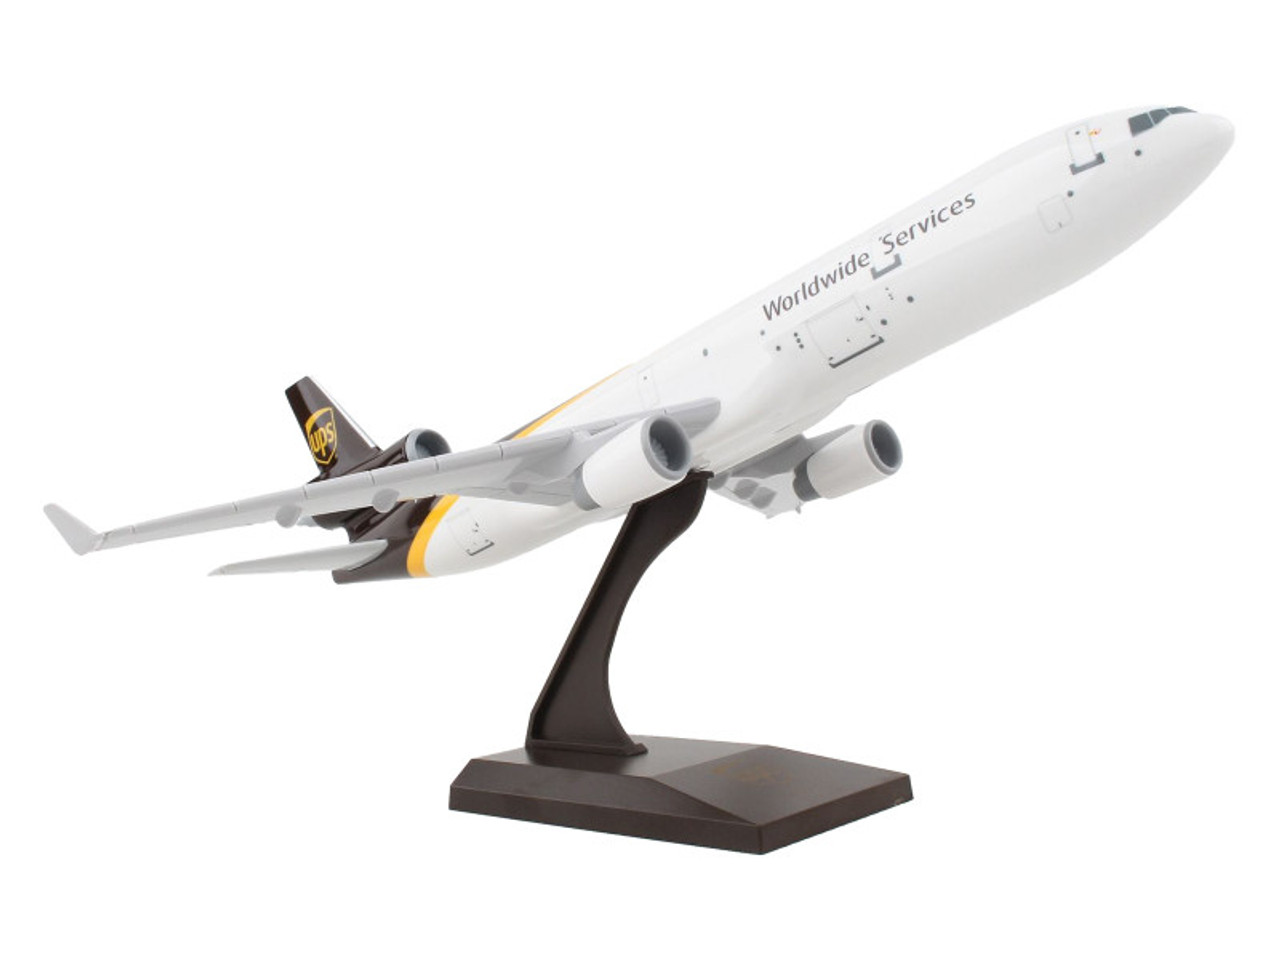 McDonnell Douglas MD-11 Commercial Aircraft "UPS Worldwide Services" (A6-ETA) White and Brown (Snap-Fit) 1/200 Plastic Model by Skymarks